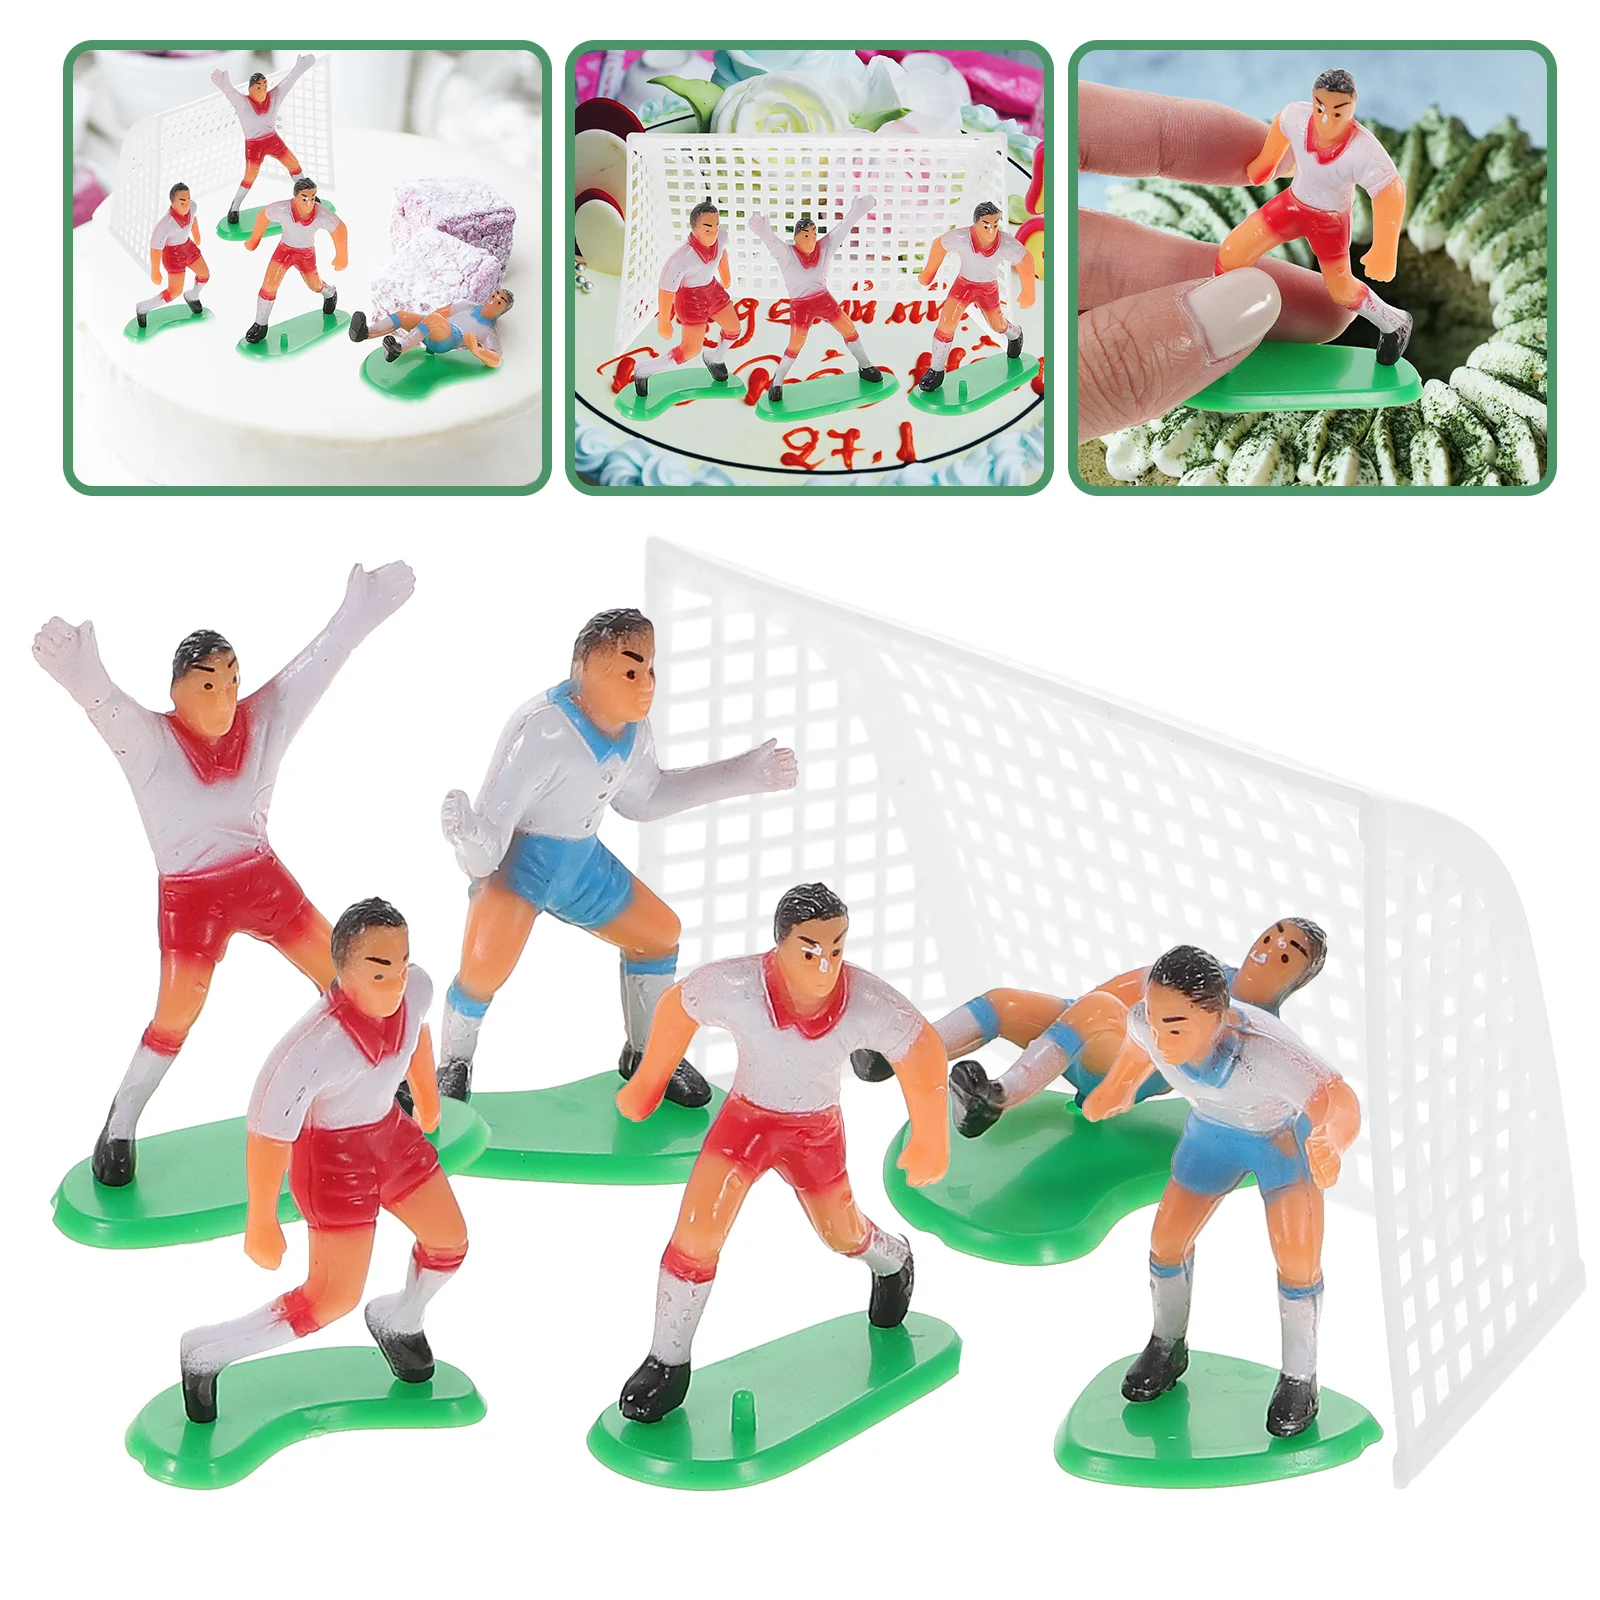 

Cake Soccer Topper Football Cupcake Decorations Theme Birthday Sports Party Toppers Figurines Supplies Decor Miniature Ornament